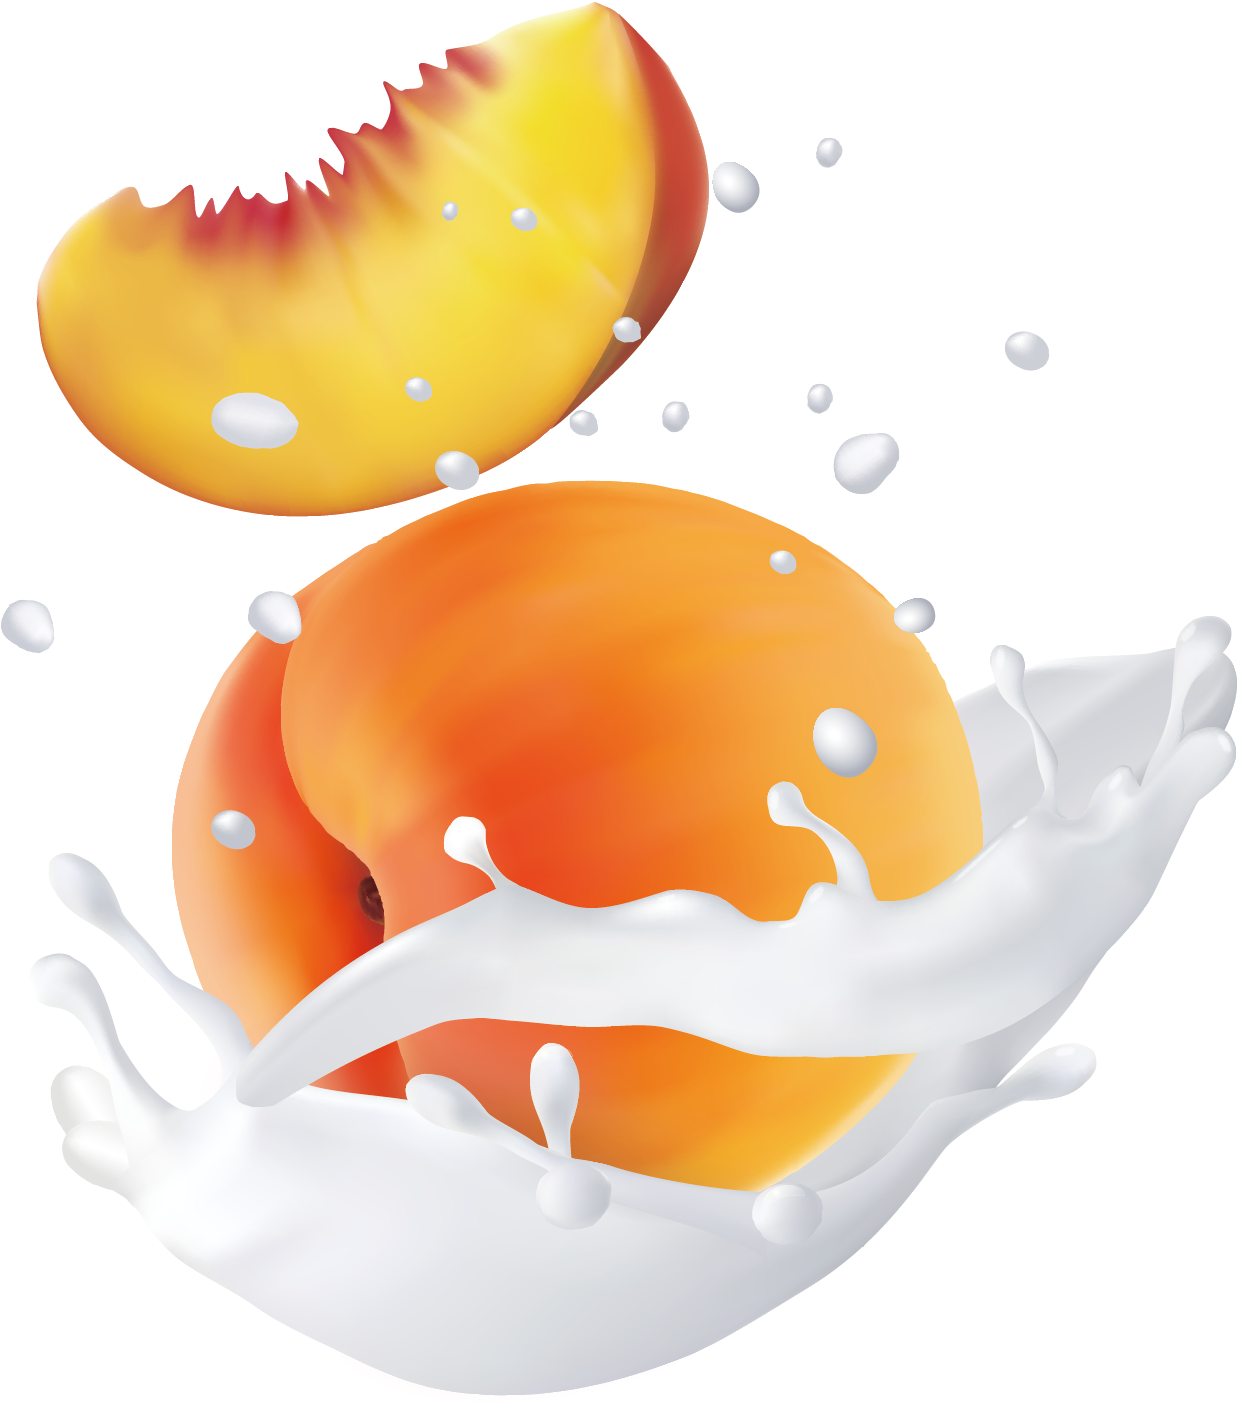 Fruit Water Splash Clipart Egg - Peach - Png Download (1667x1667), Png Download